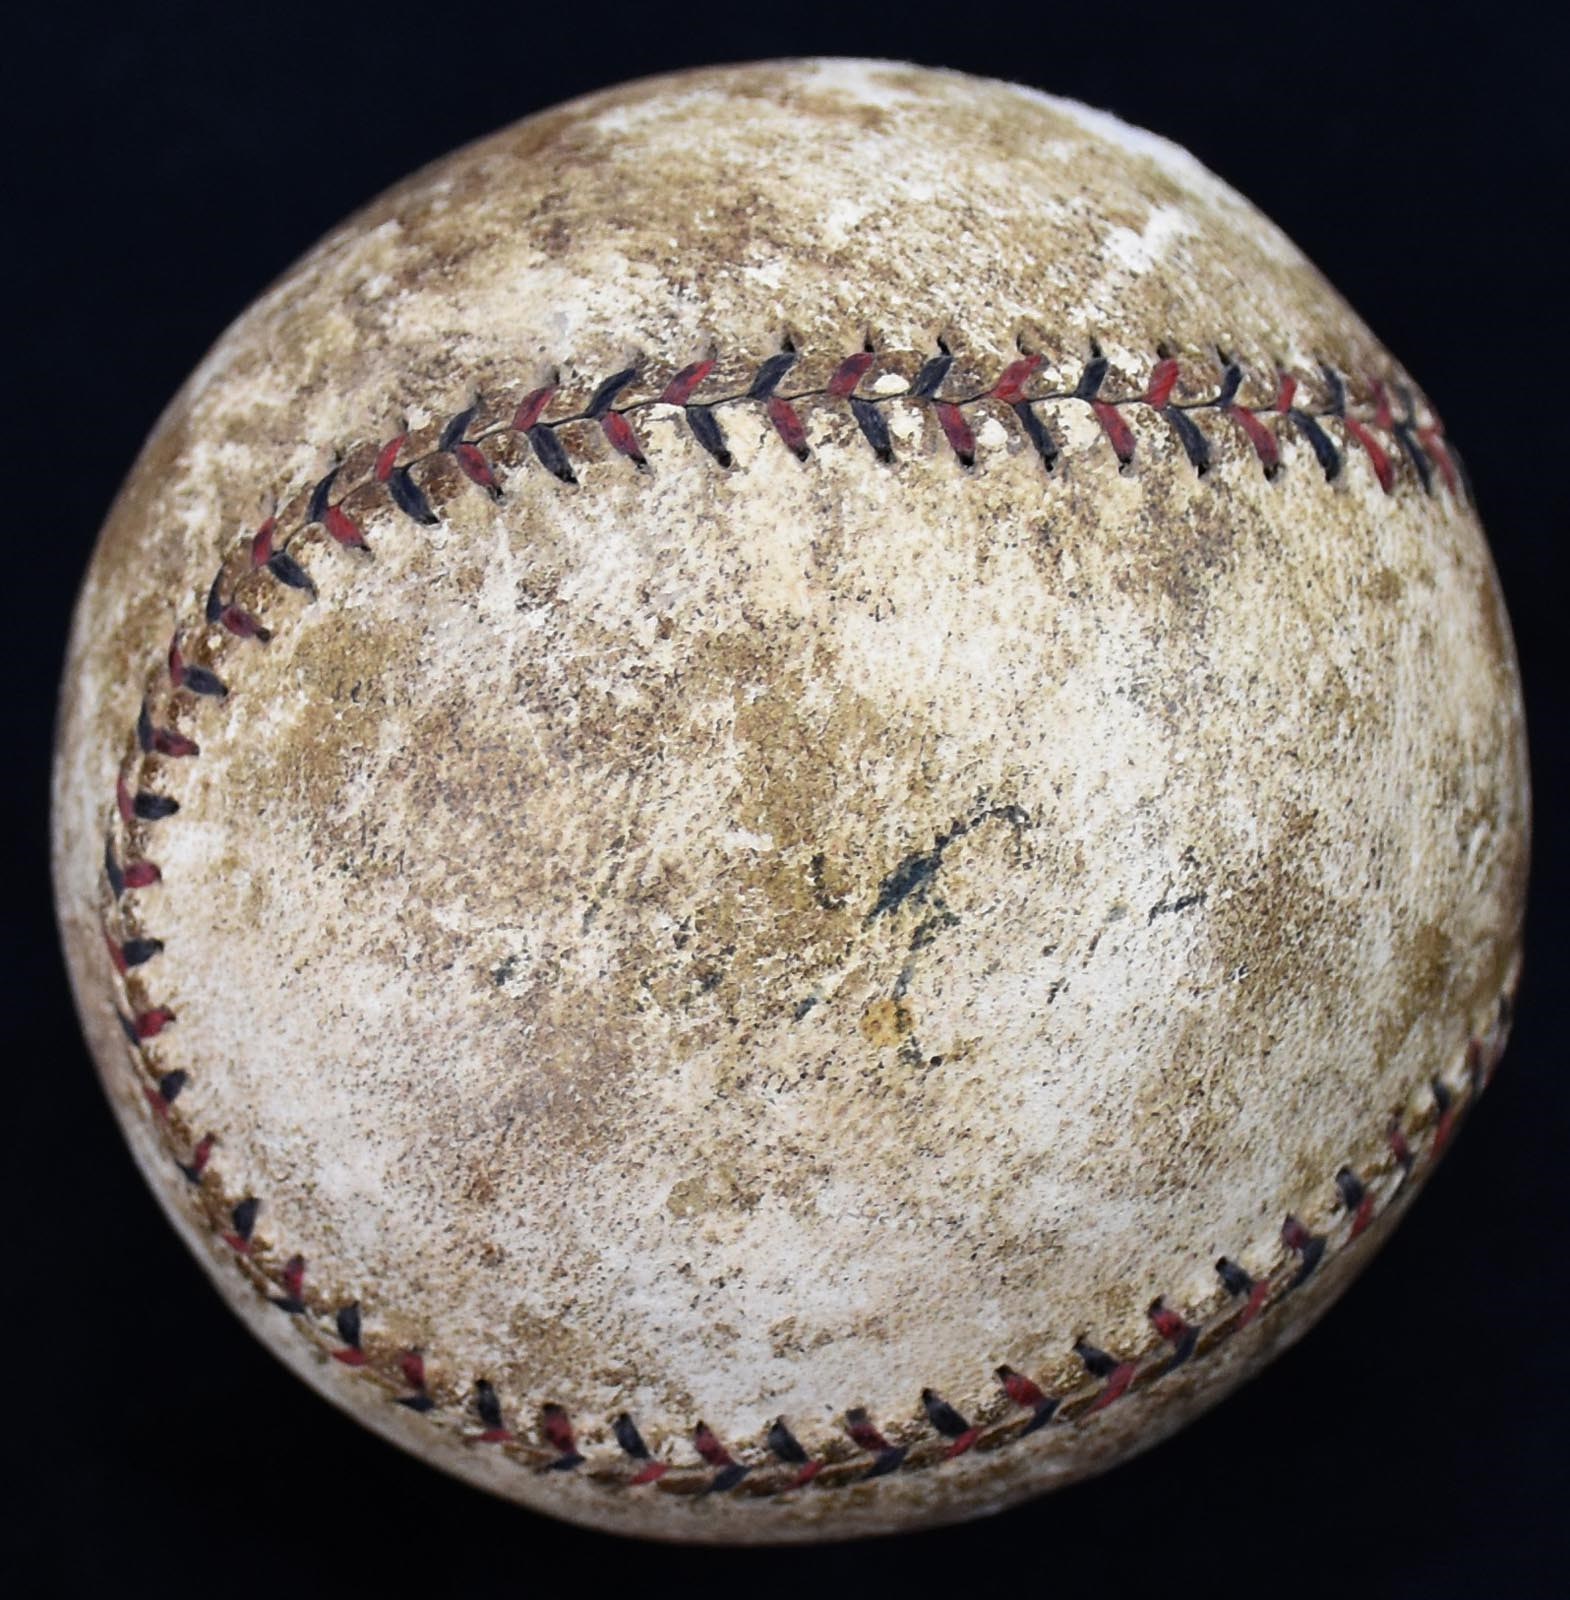 Ruth and Gehrig - Babe Ruth Single Signed Baseball (Low Grade)